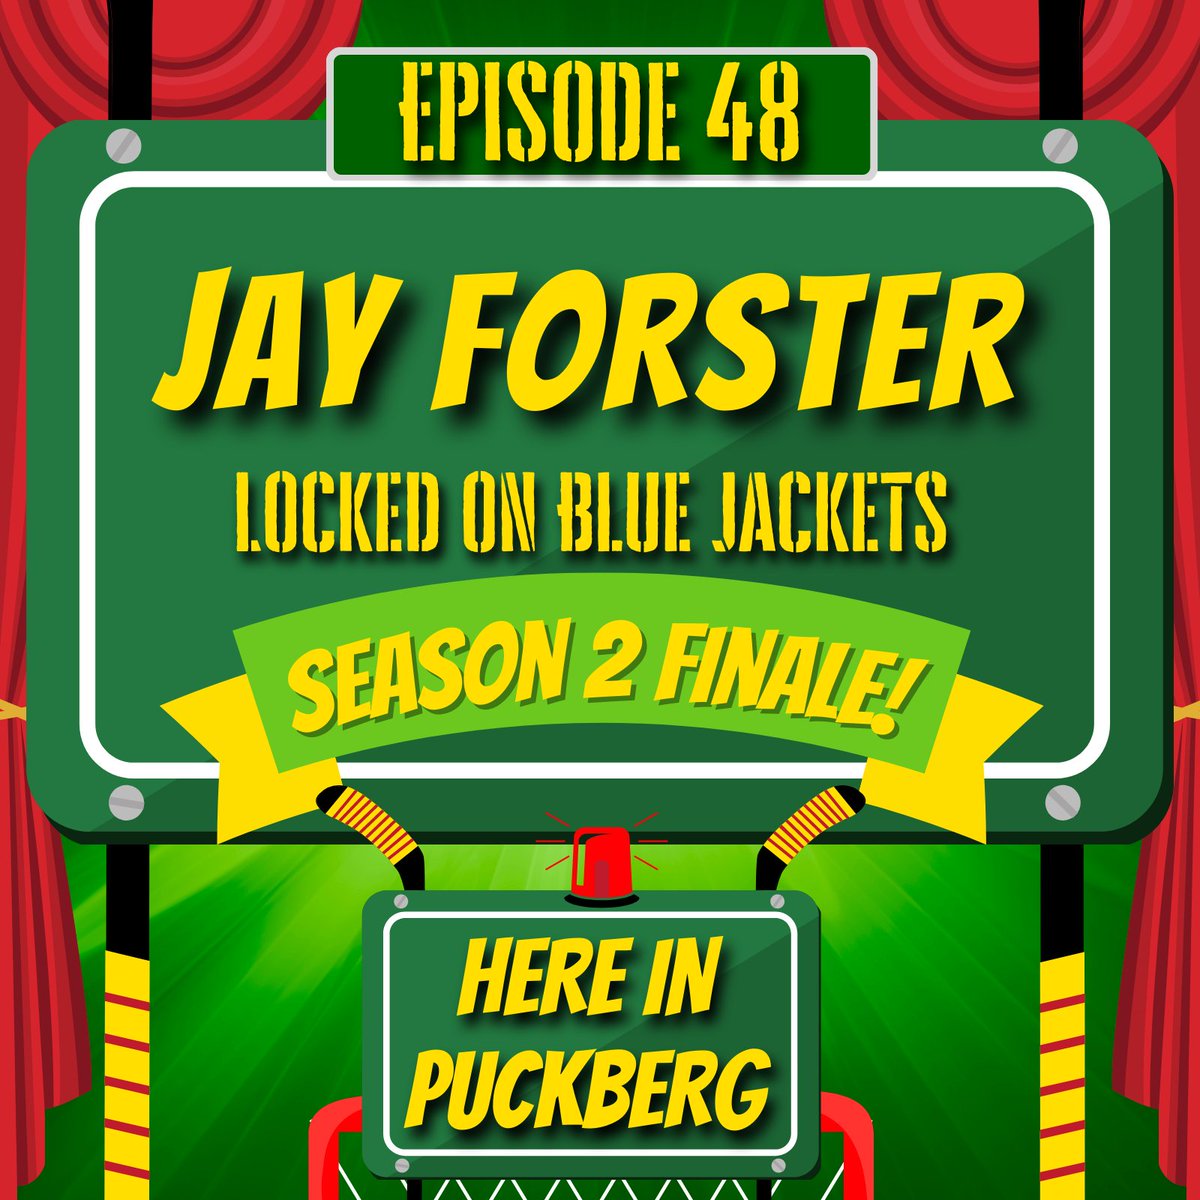 🚨SEASON FINALE!!🚨 This Saturday we talk to @_jakobforster the host of @LO_BlueJackets! We talk about the state of hockey in England, the life of an English hockey fan, and most importantly the Columbus Blue Jackets! #THPN linktr.ee/hereinpuckberg